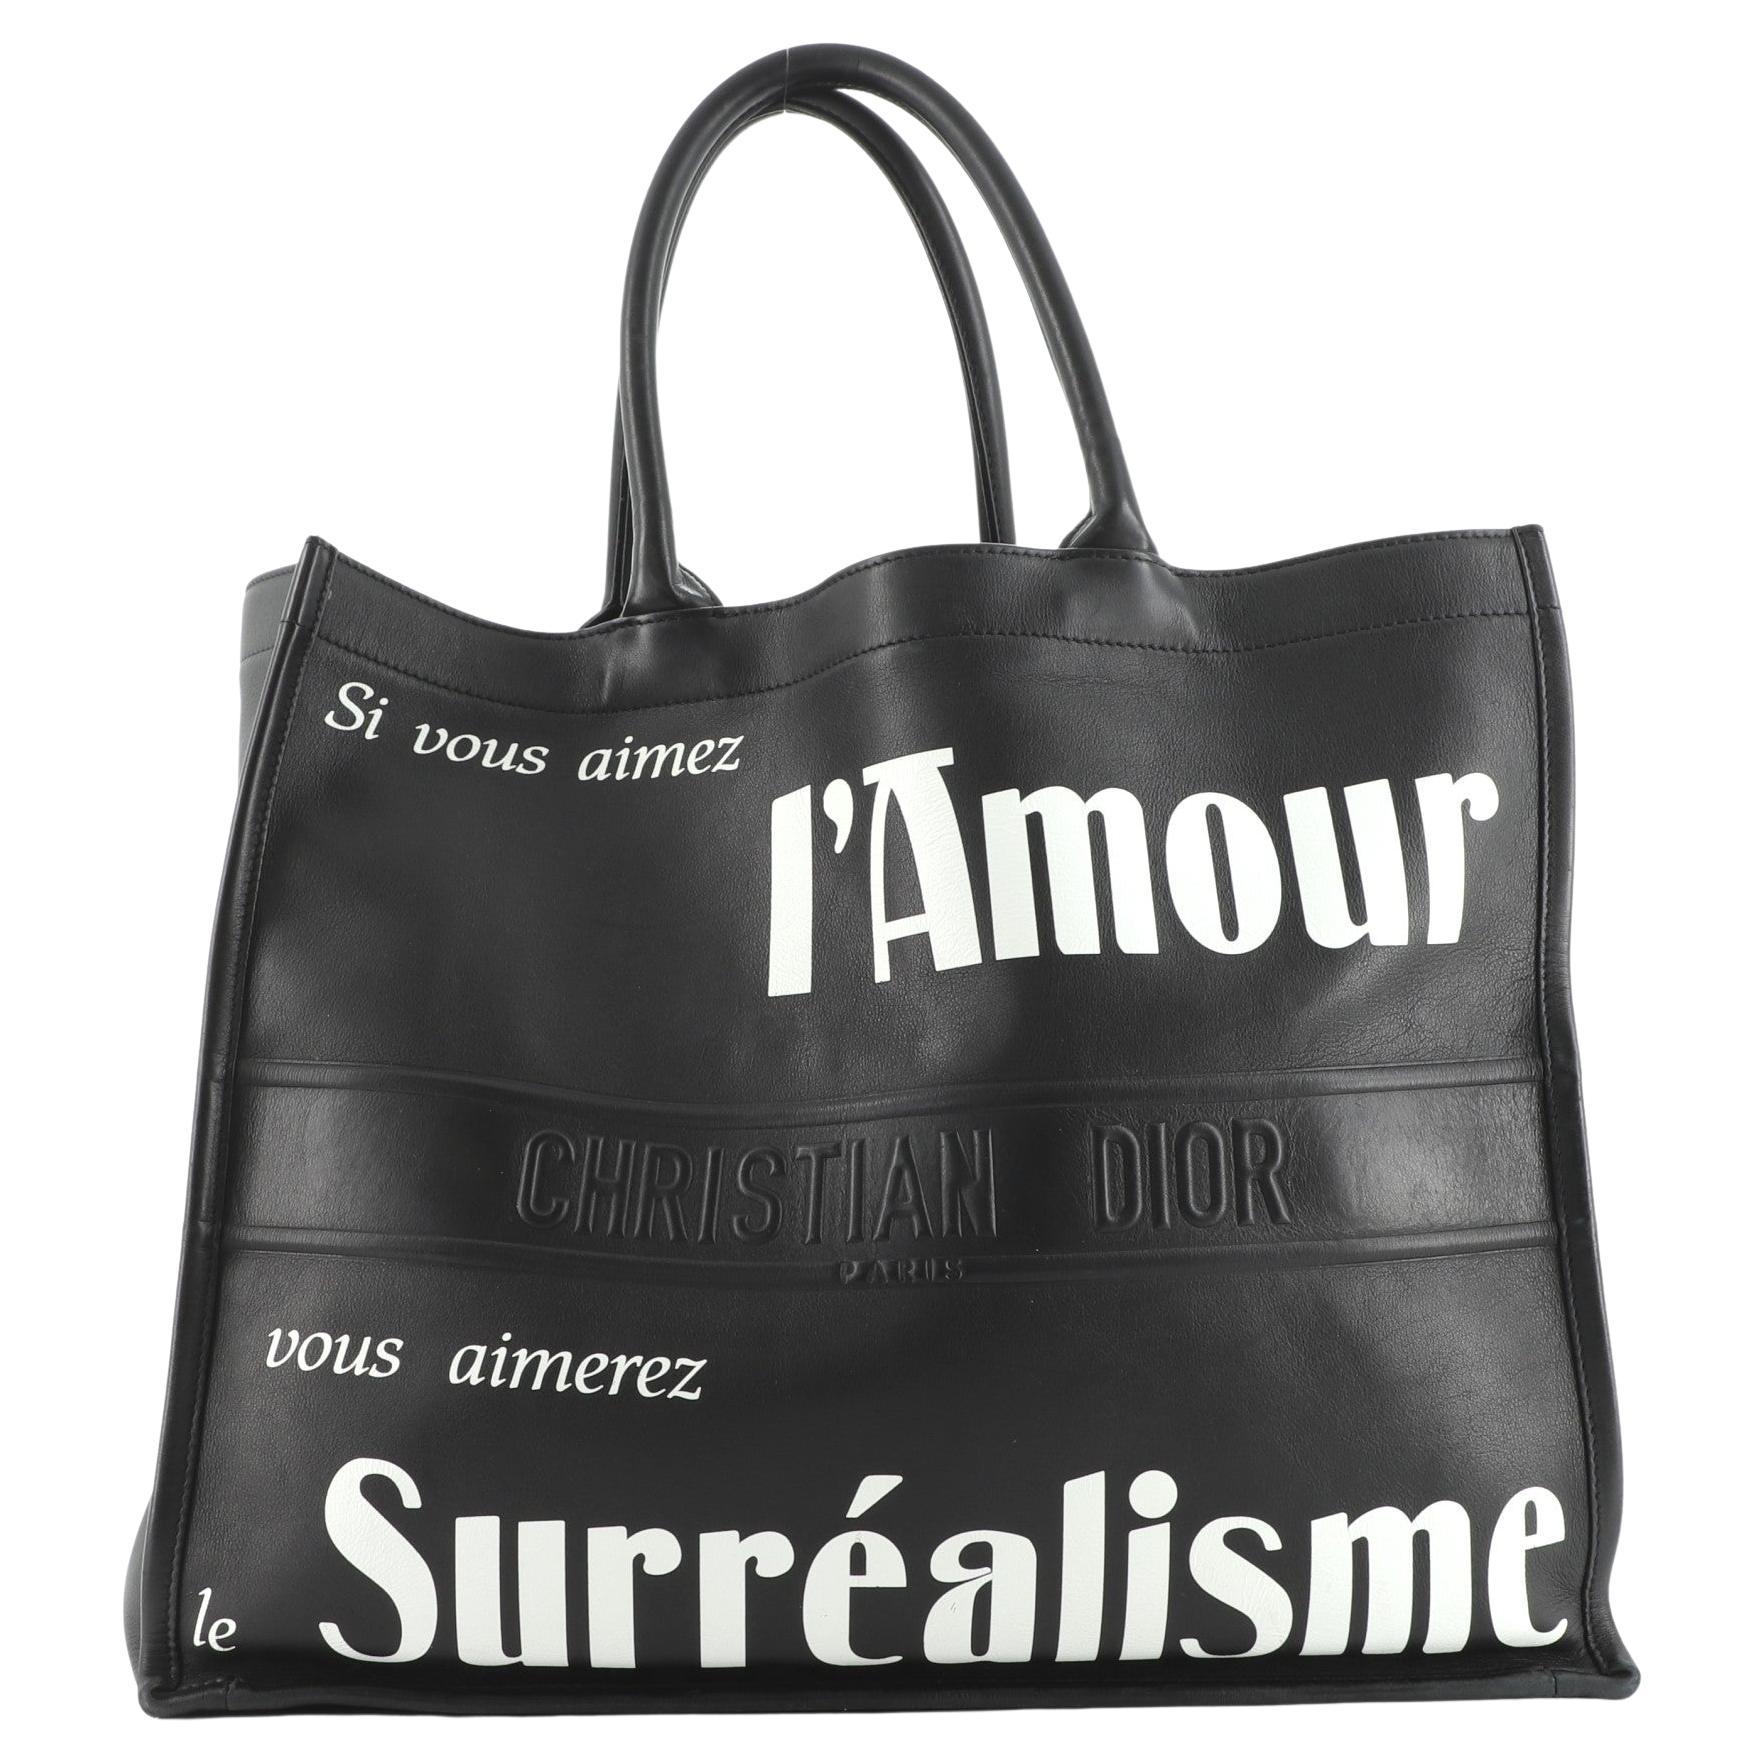 Christian Dior Surrealism Book Tote Printed Leather